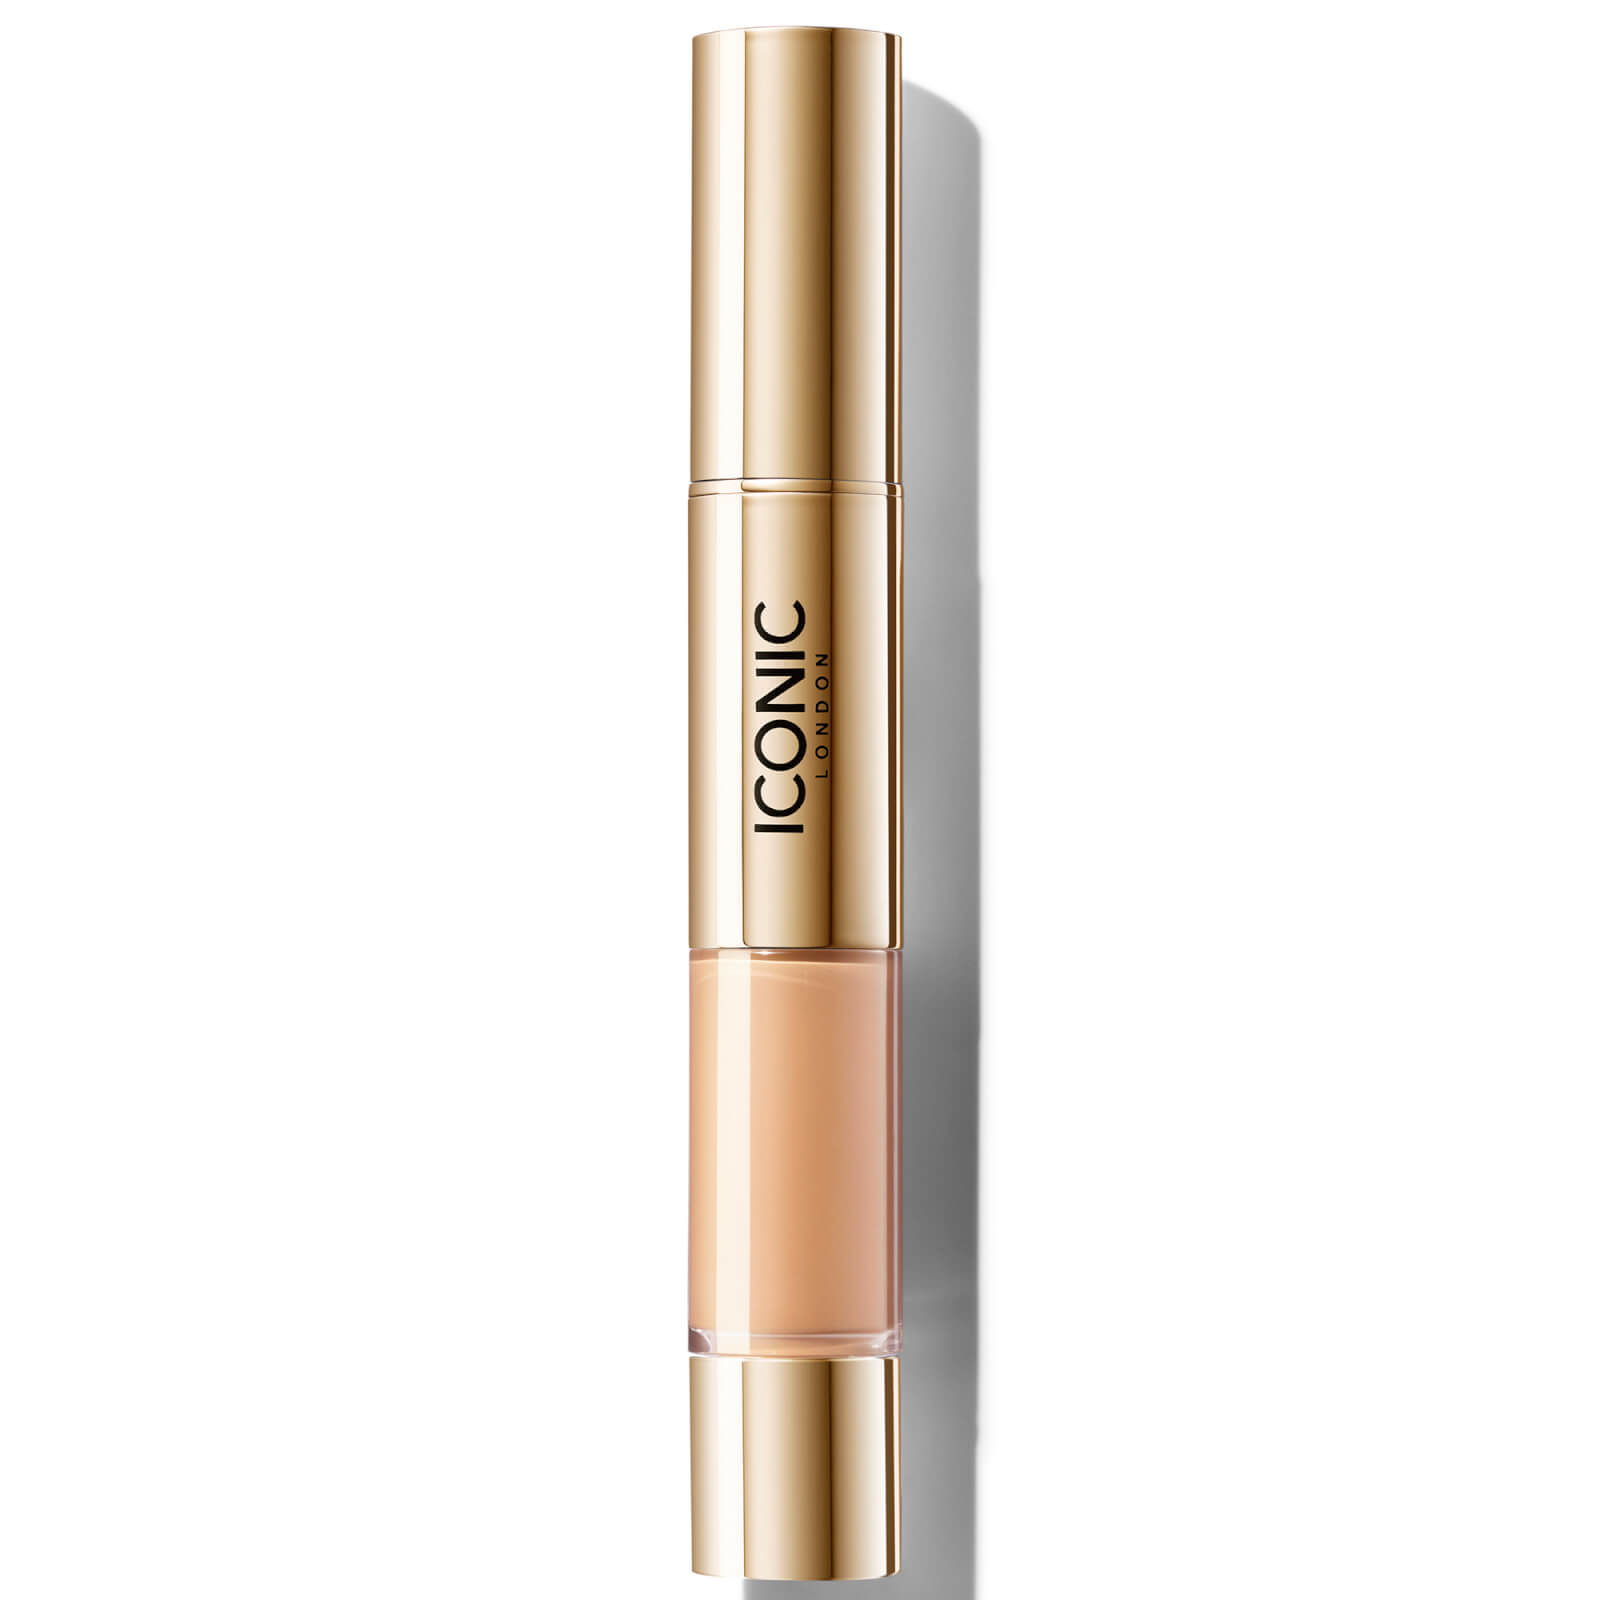 iconic london radiant concealer and brightening duo neutral light